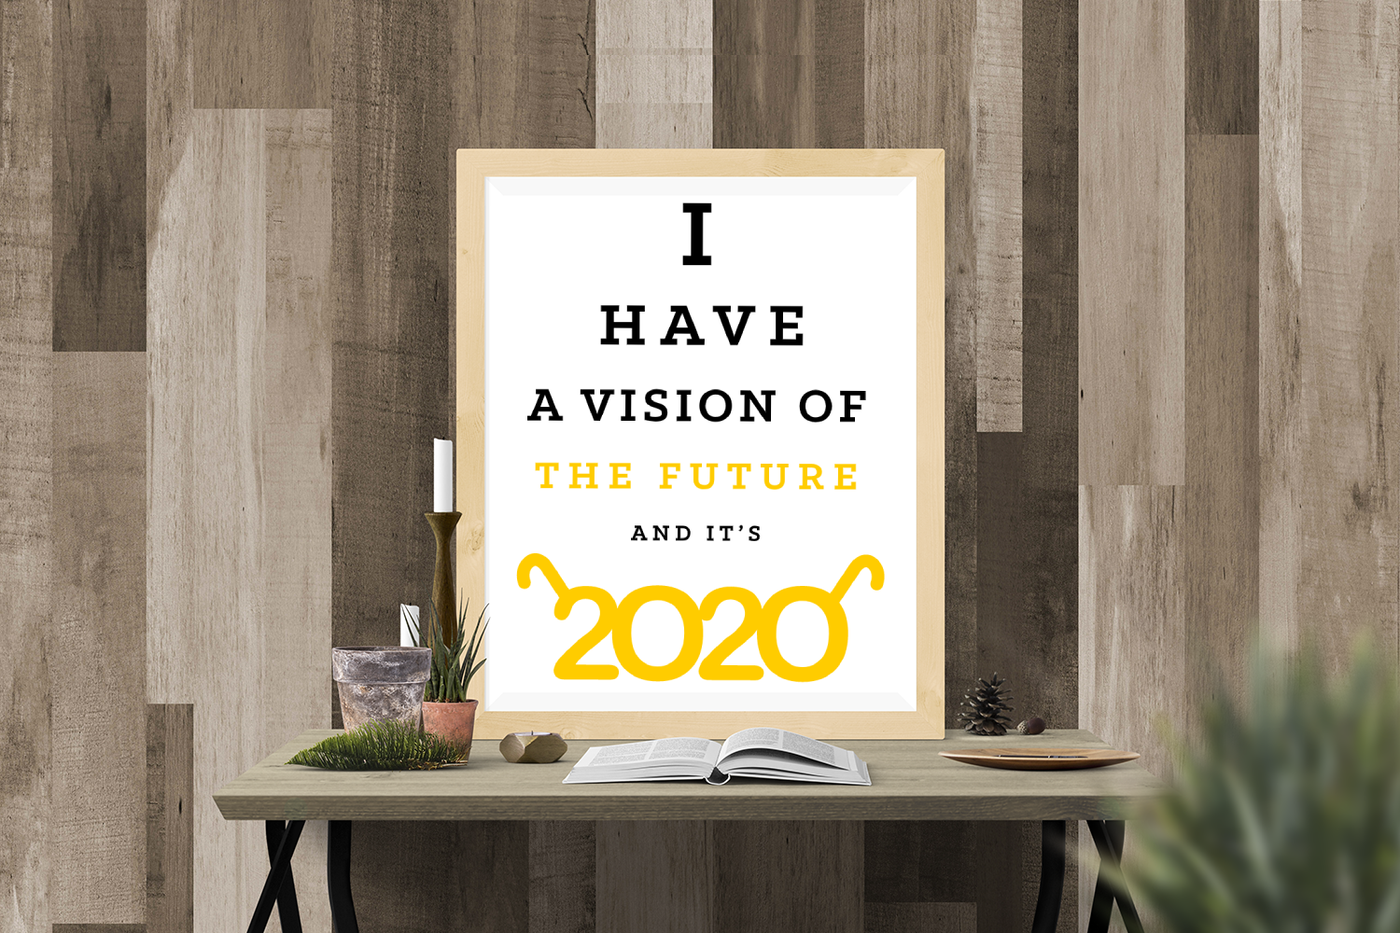 A framed poster sits on a desk against a wood panel wall. The poster is white with a yellow and black design that reads "I have a vision of the future and it's 2020." The words resemble an eye chart. The 2020 has arms to look like a pair of glasses.